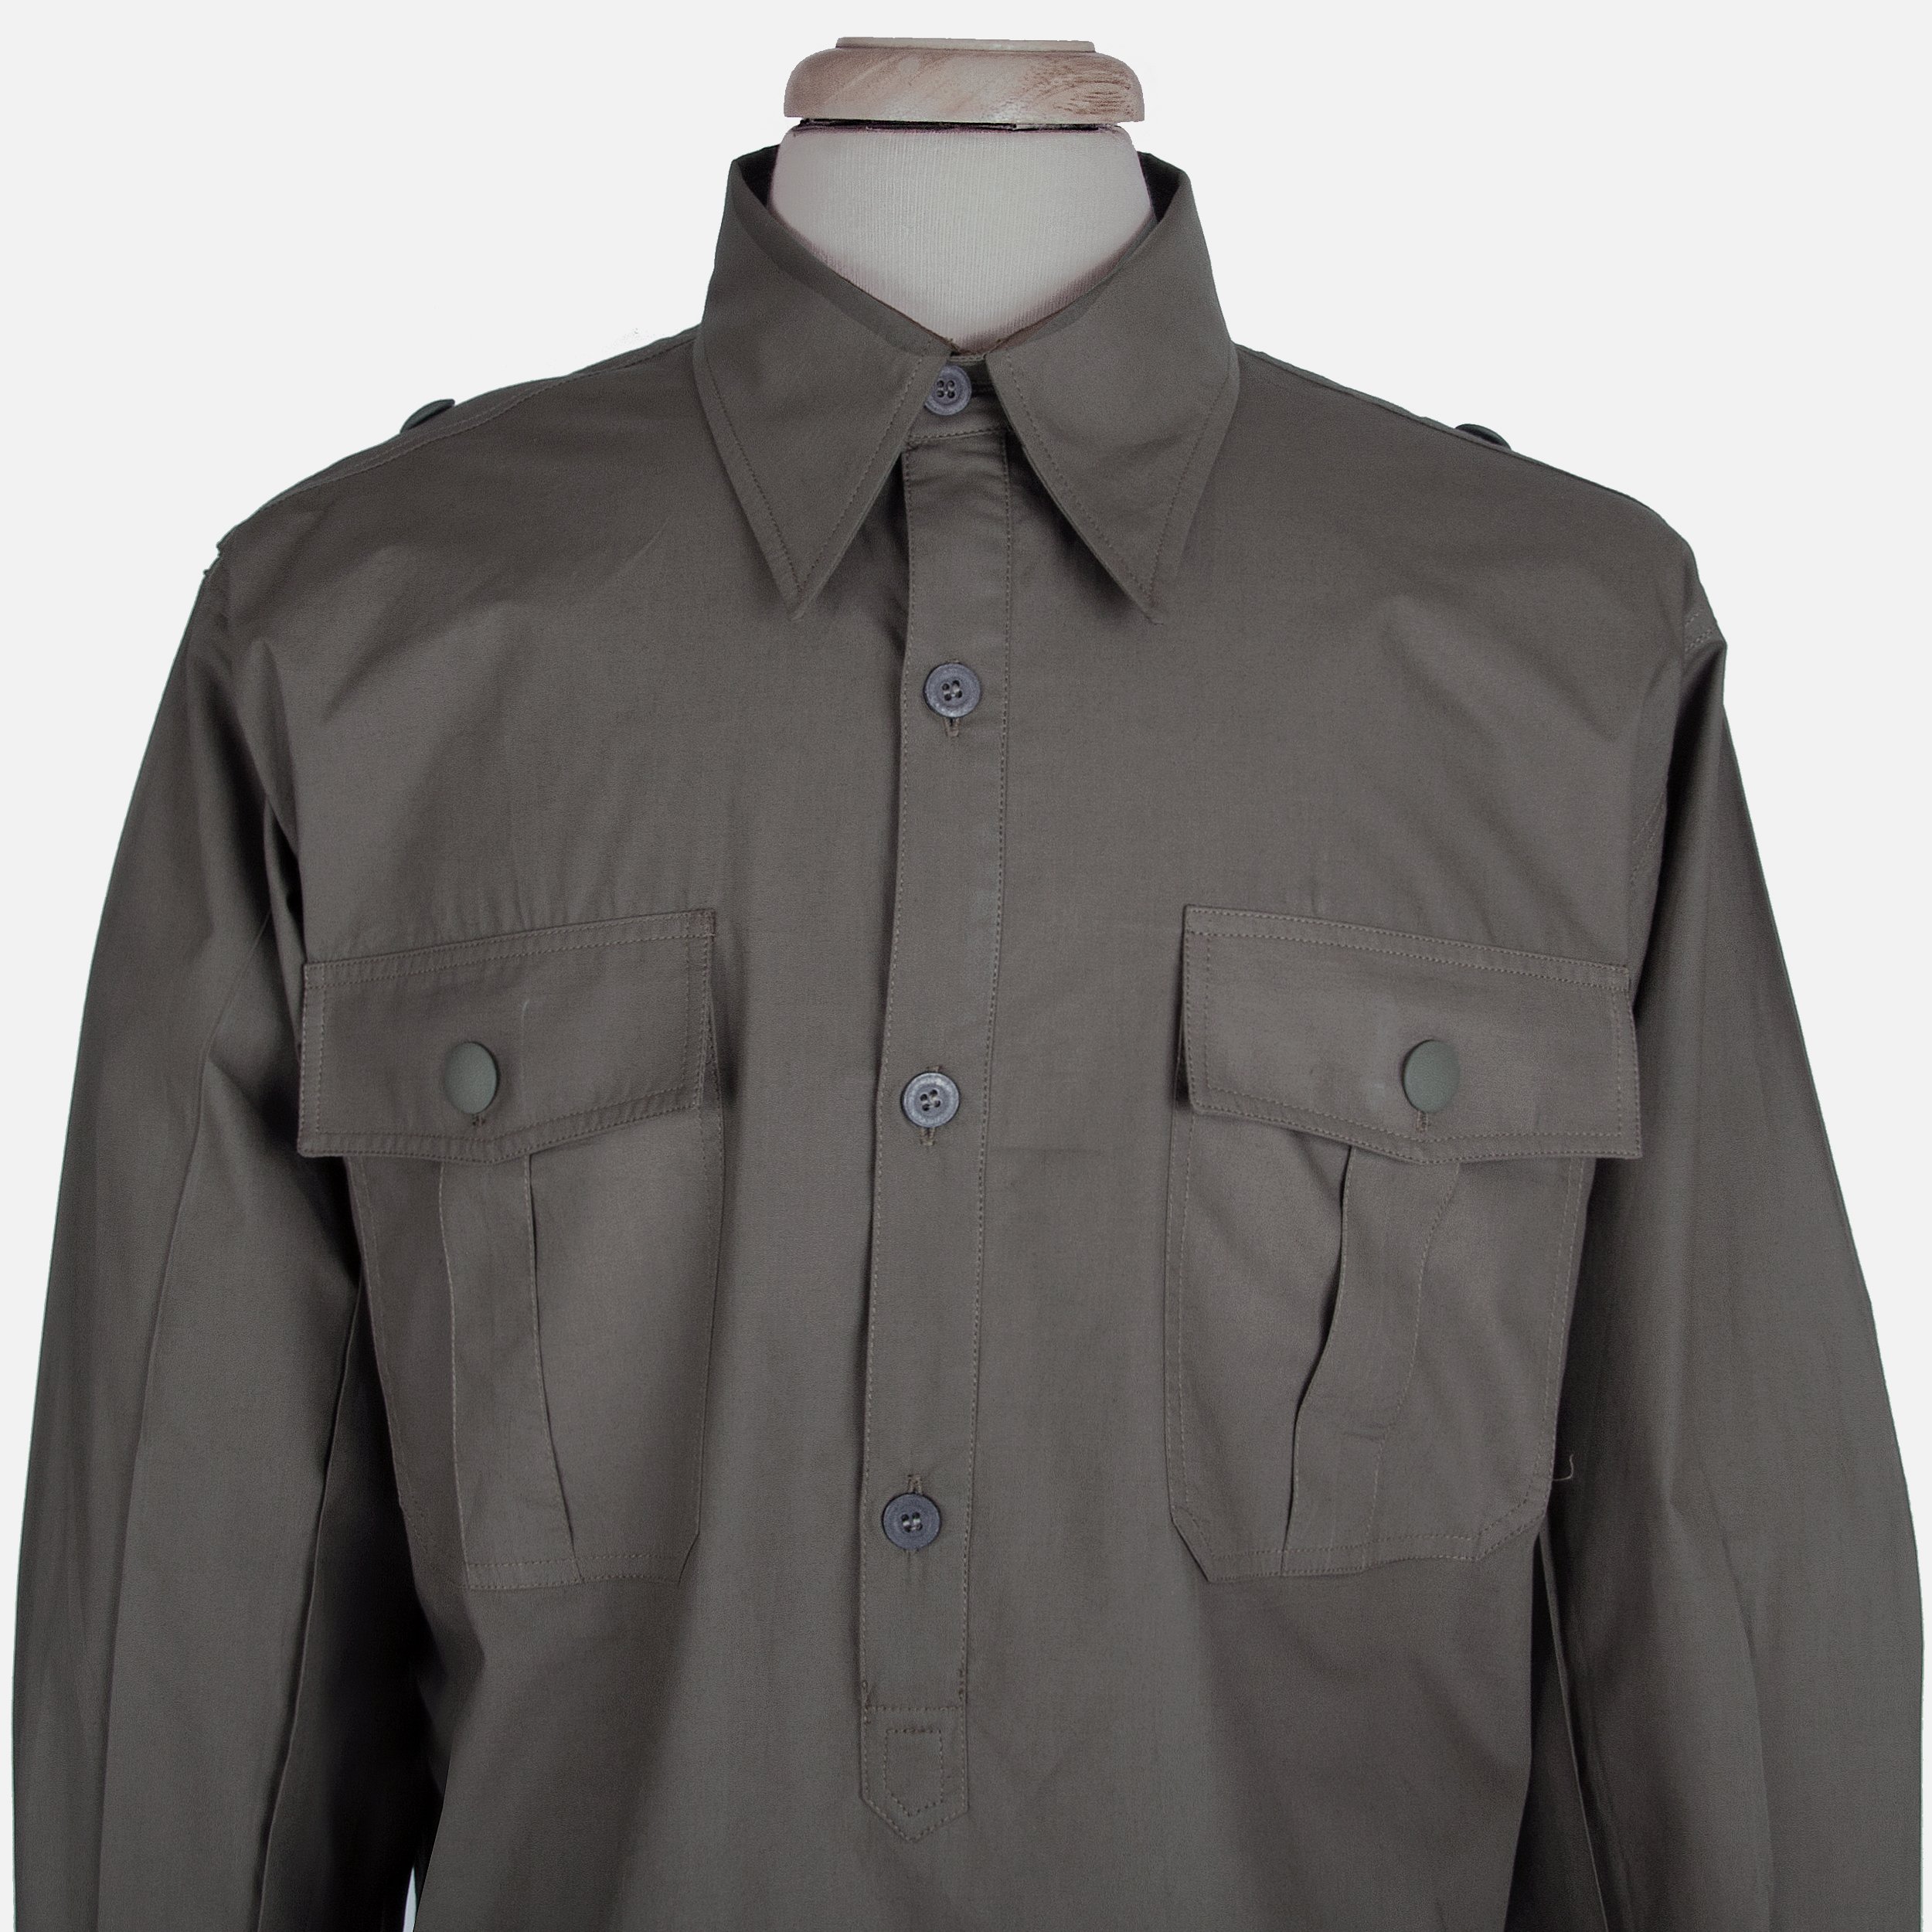 SM Wholesale USA — New German WWII Olive Service Shirt